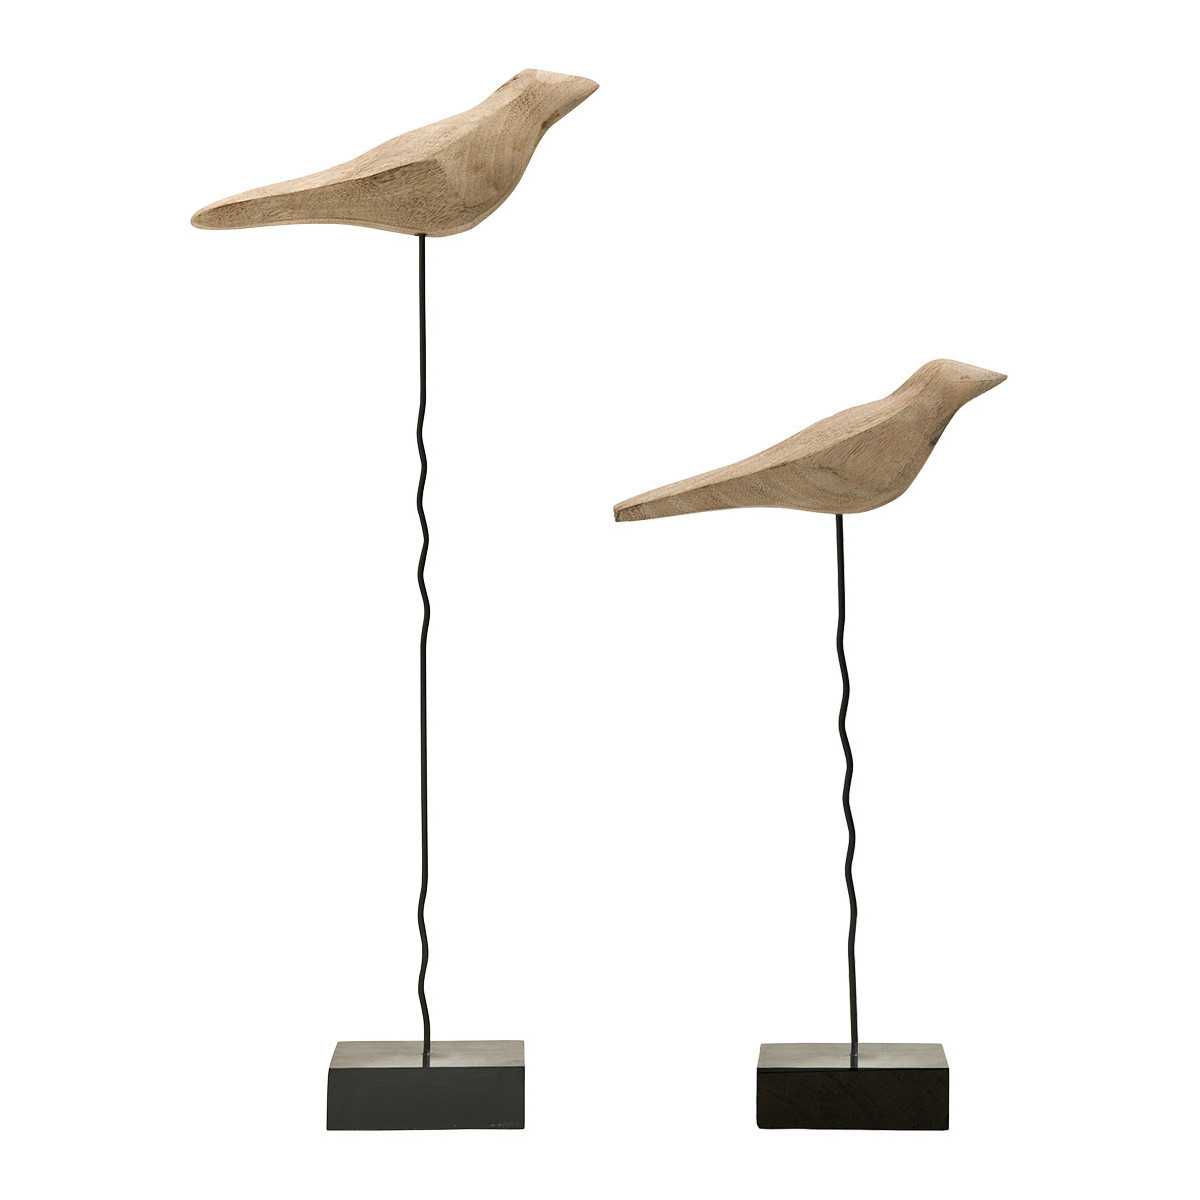 Set of two BIRDS statues in mango tree and metal